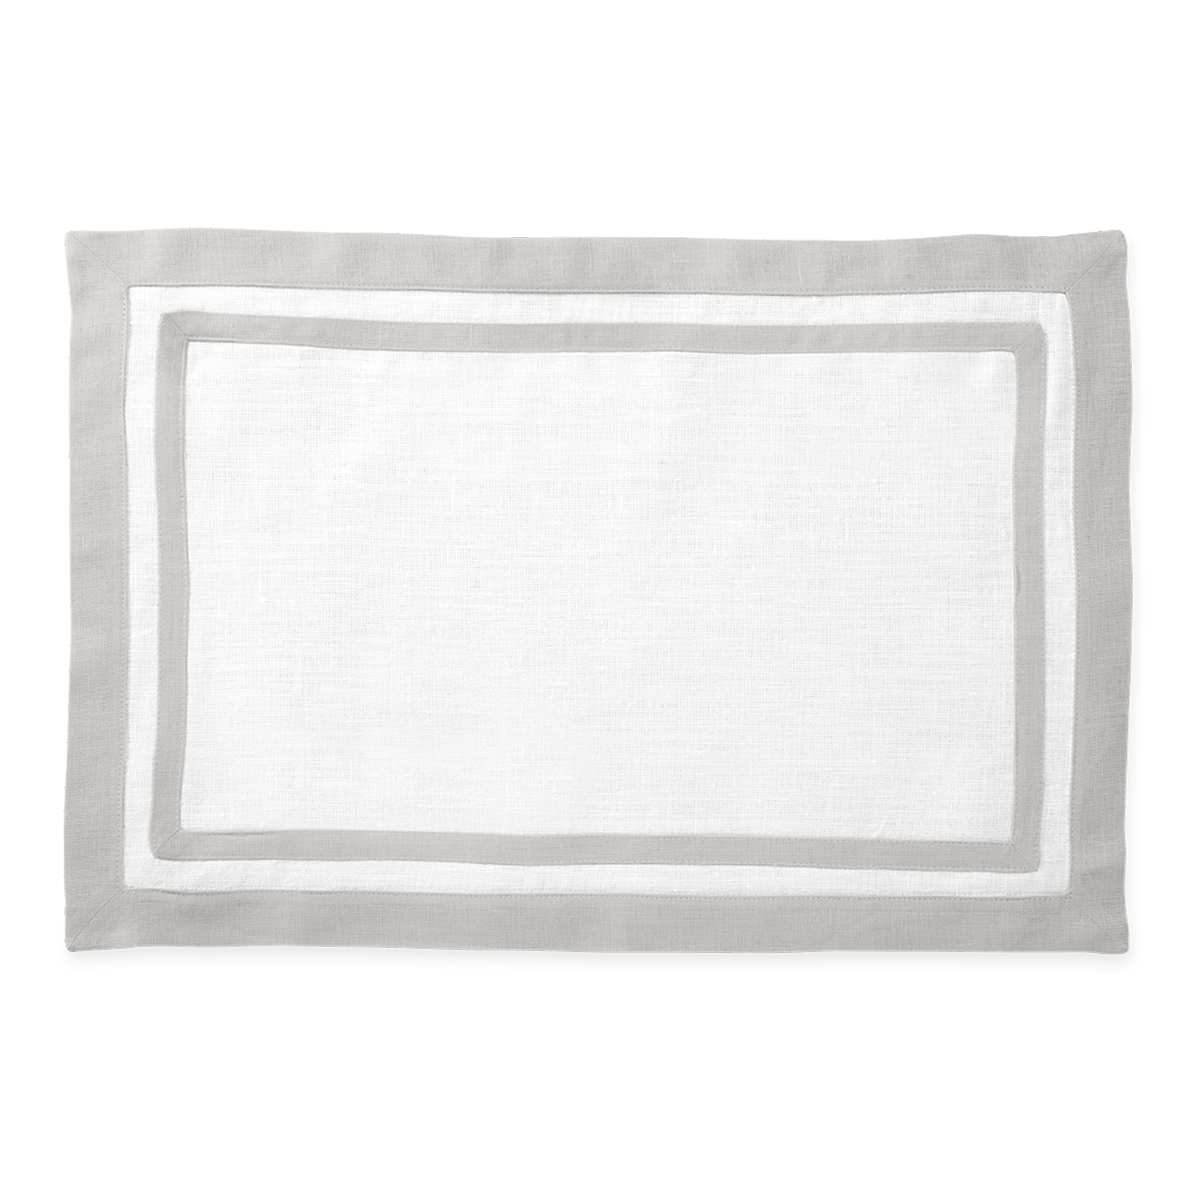 Silo Image of Matouk Double Border Rectangle Placemat in Color Classic Grey